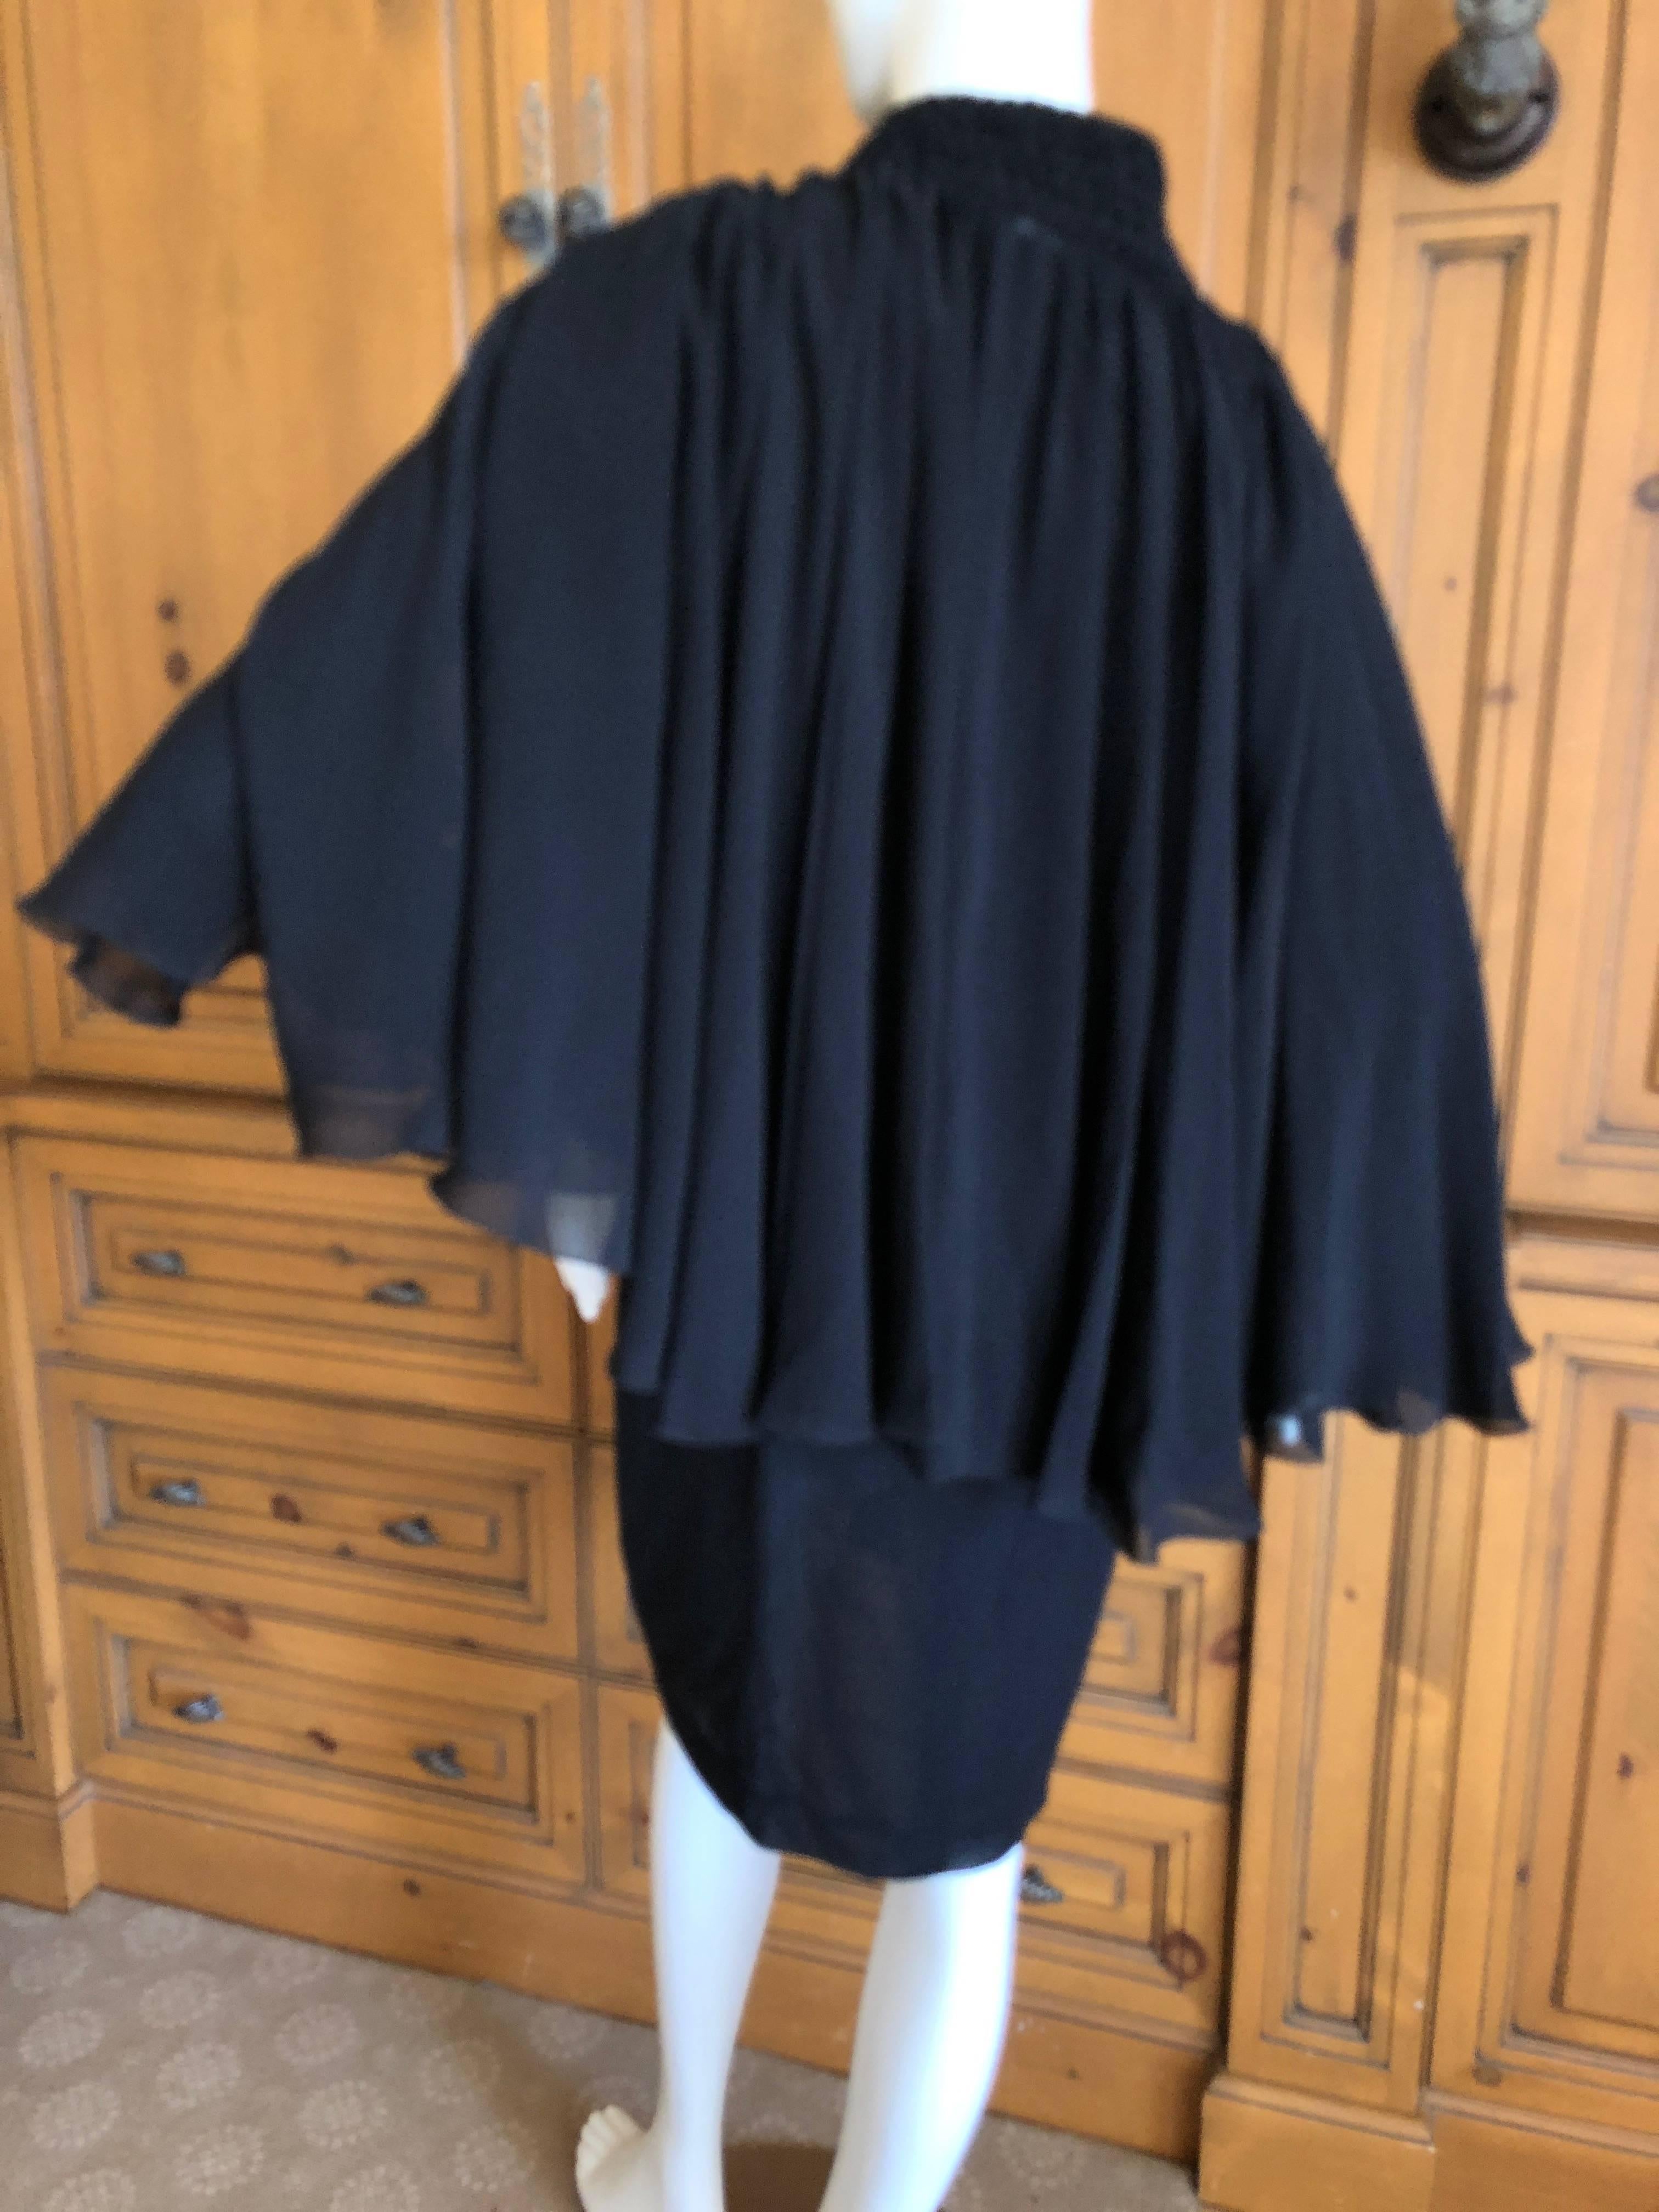 Christian Lacroix Vintage Sheer Black Silk Cocktail Dress with Matching Cape For Sale 3